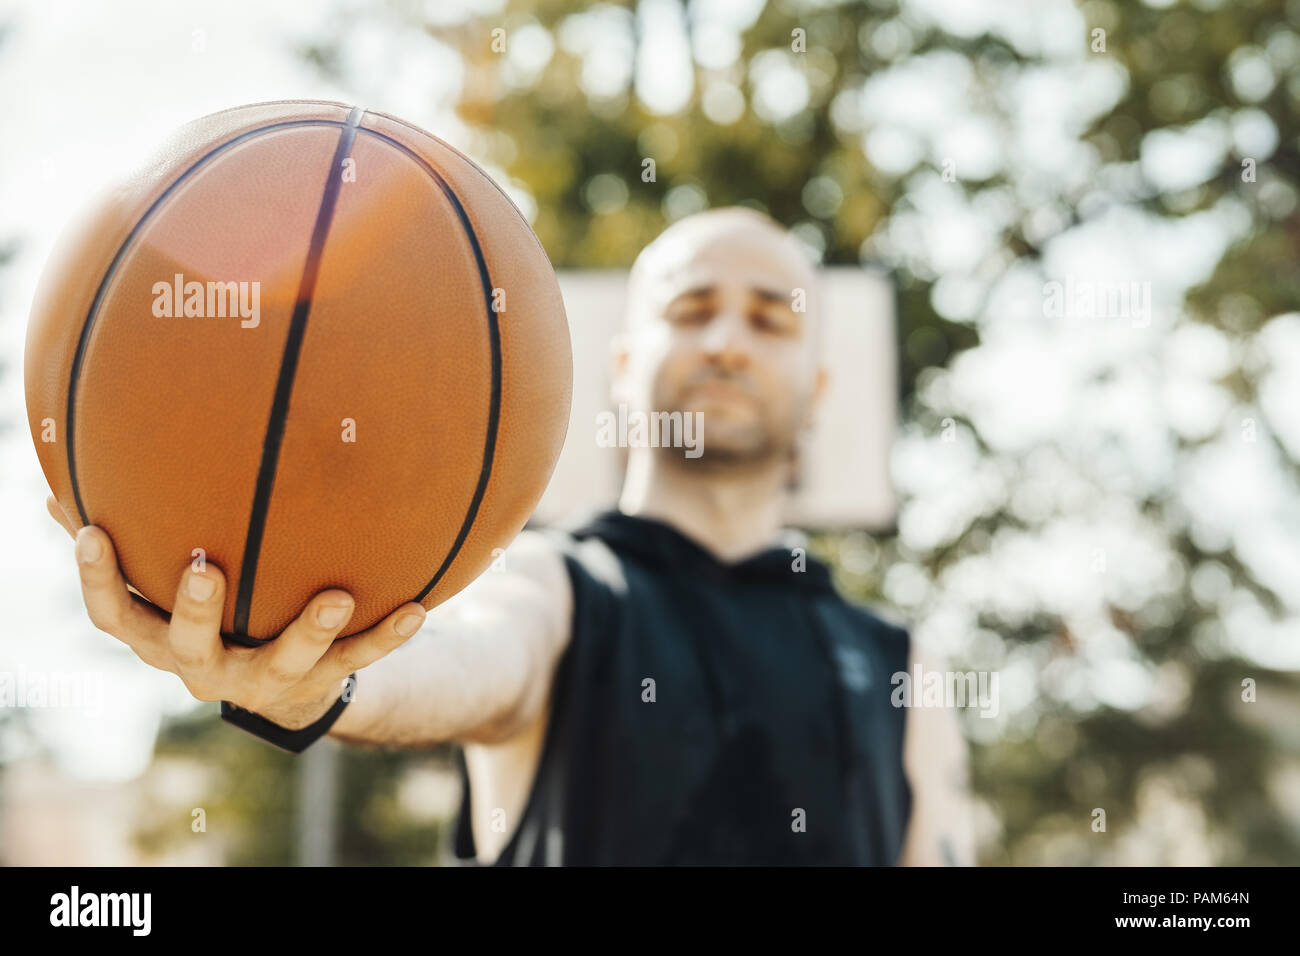 Close up of bald attractive man holding basket ball. Ball is on focus and foreground. Man, basketball hoop and board are on background and blurred. Stock Photo